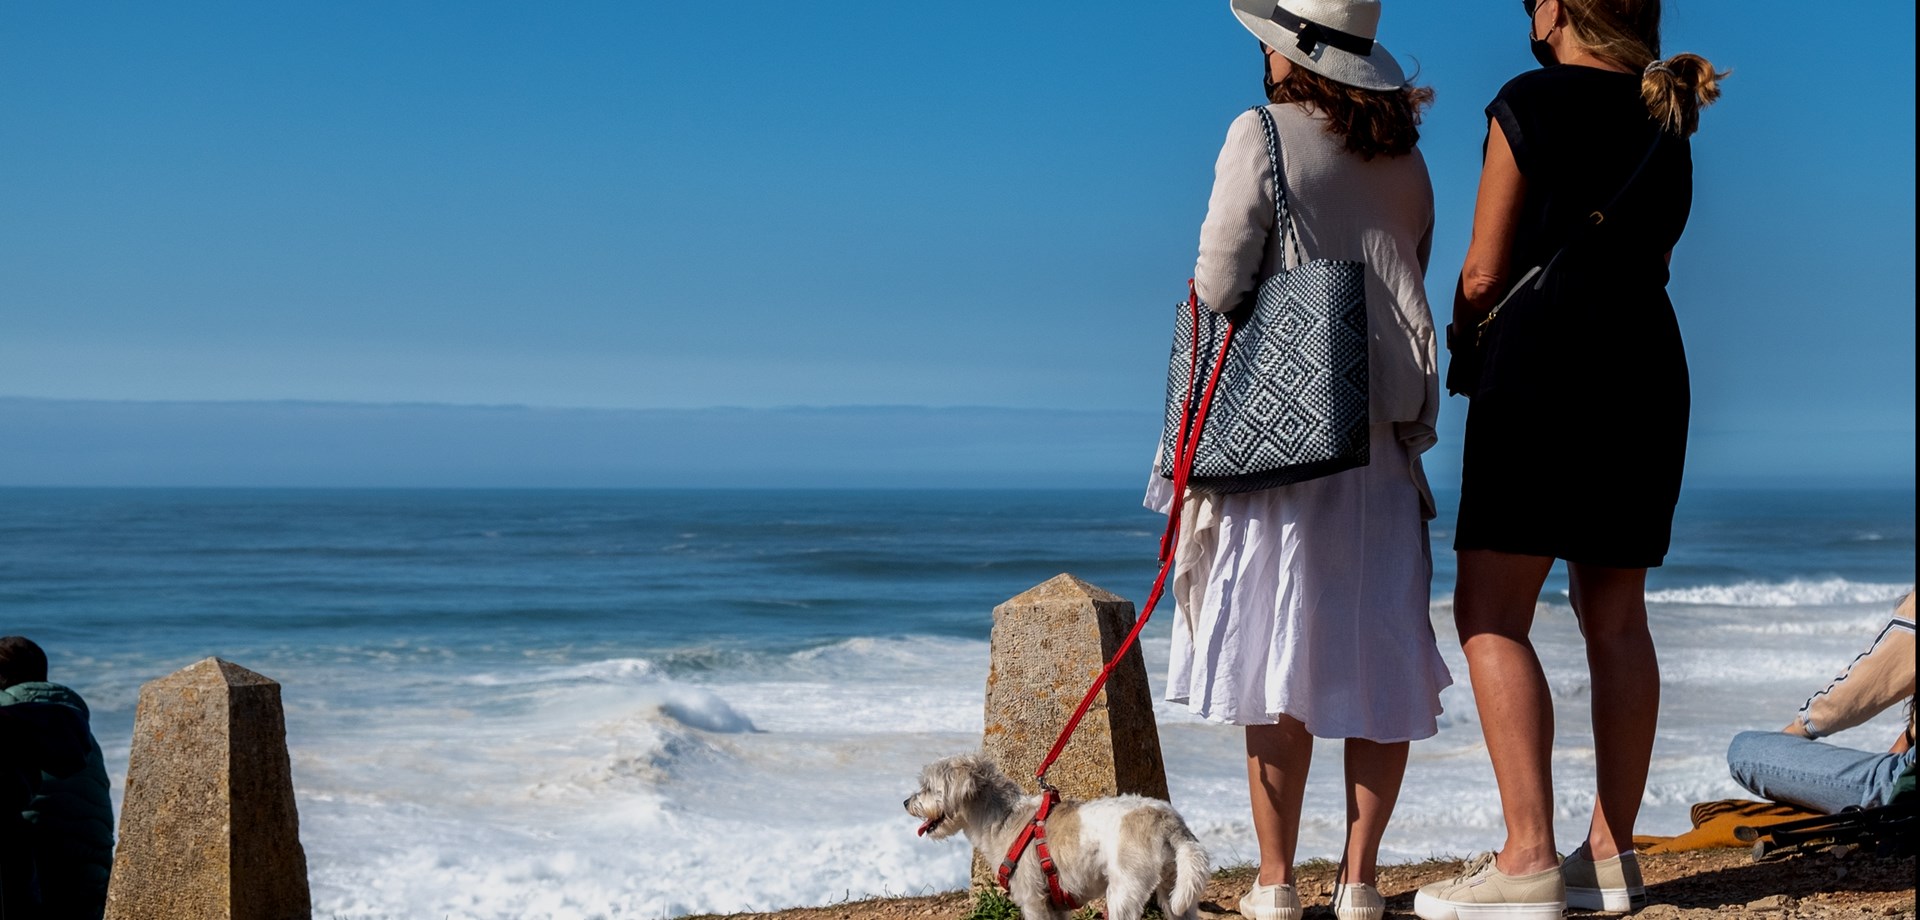 Retire in Portugal: The best regions and towns for retirees